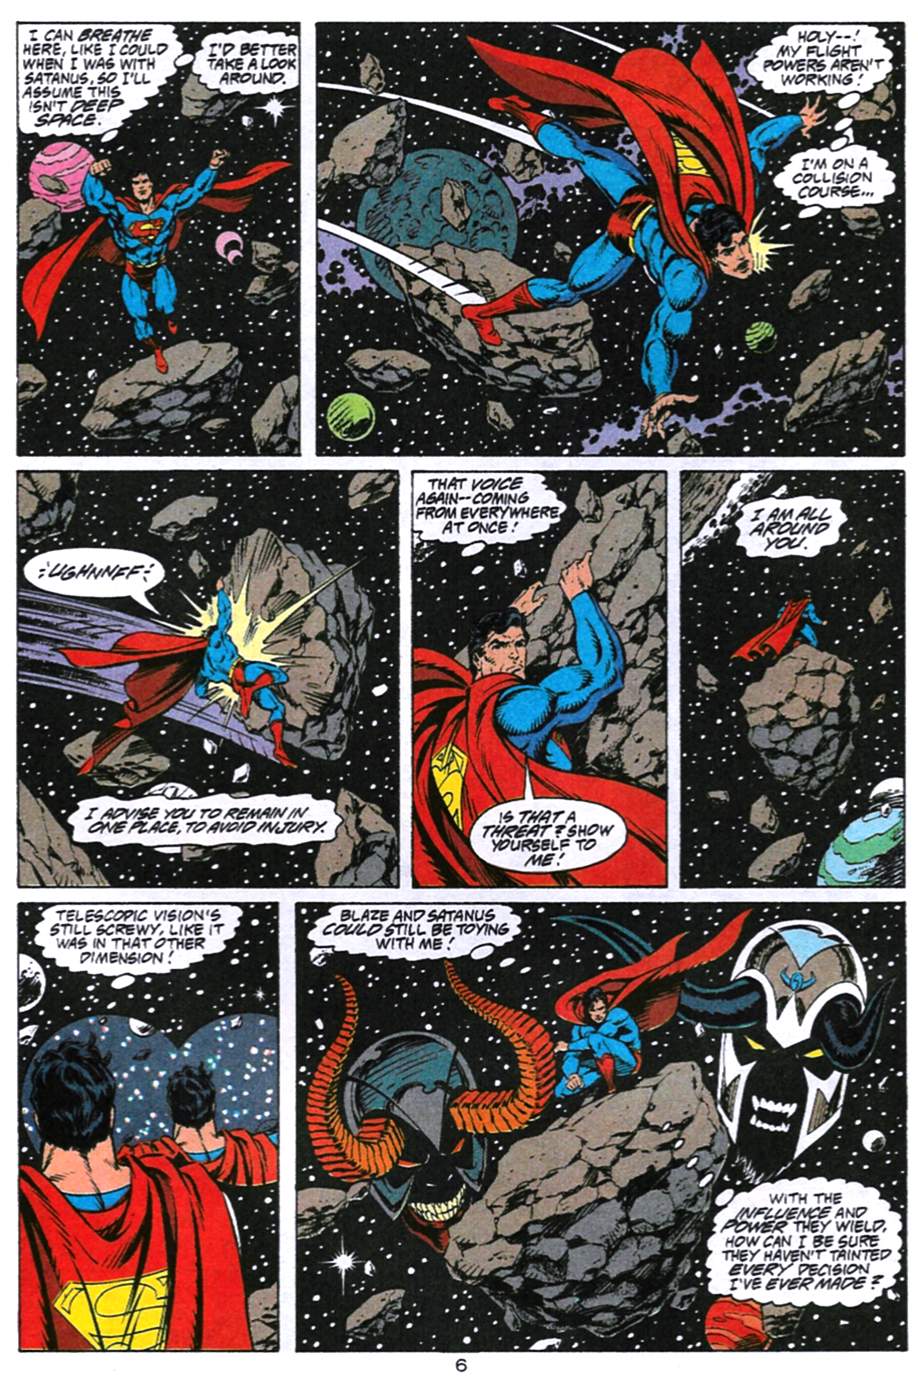 Adventures of Superman (1987) 494 Page 6